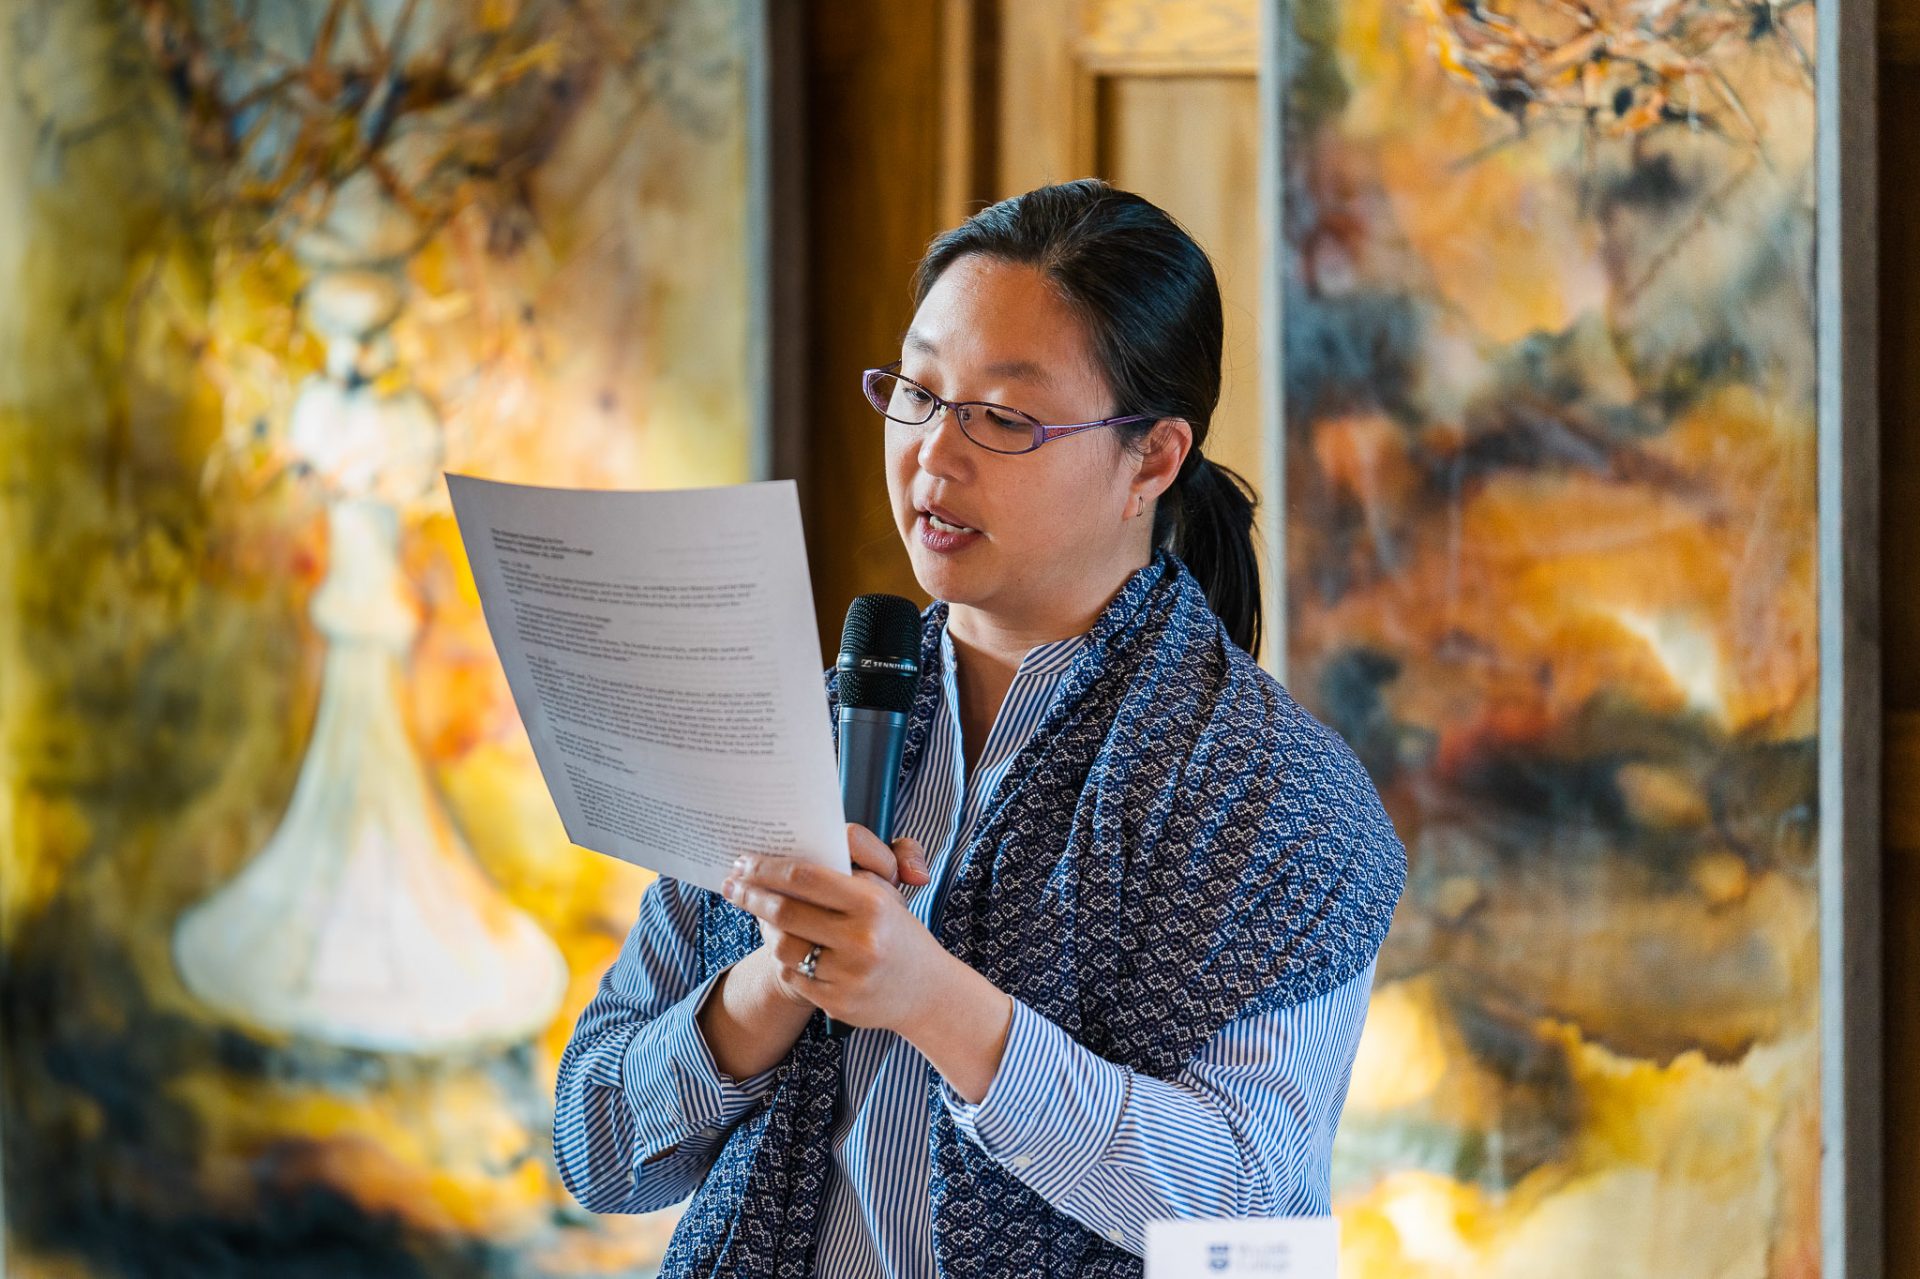 A woman stands in front of paintings, reading a piece of paper aloud into a microphone